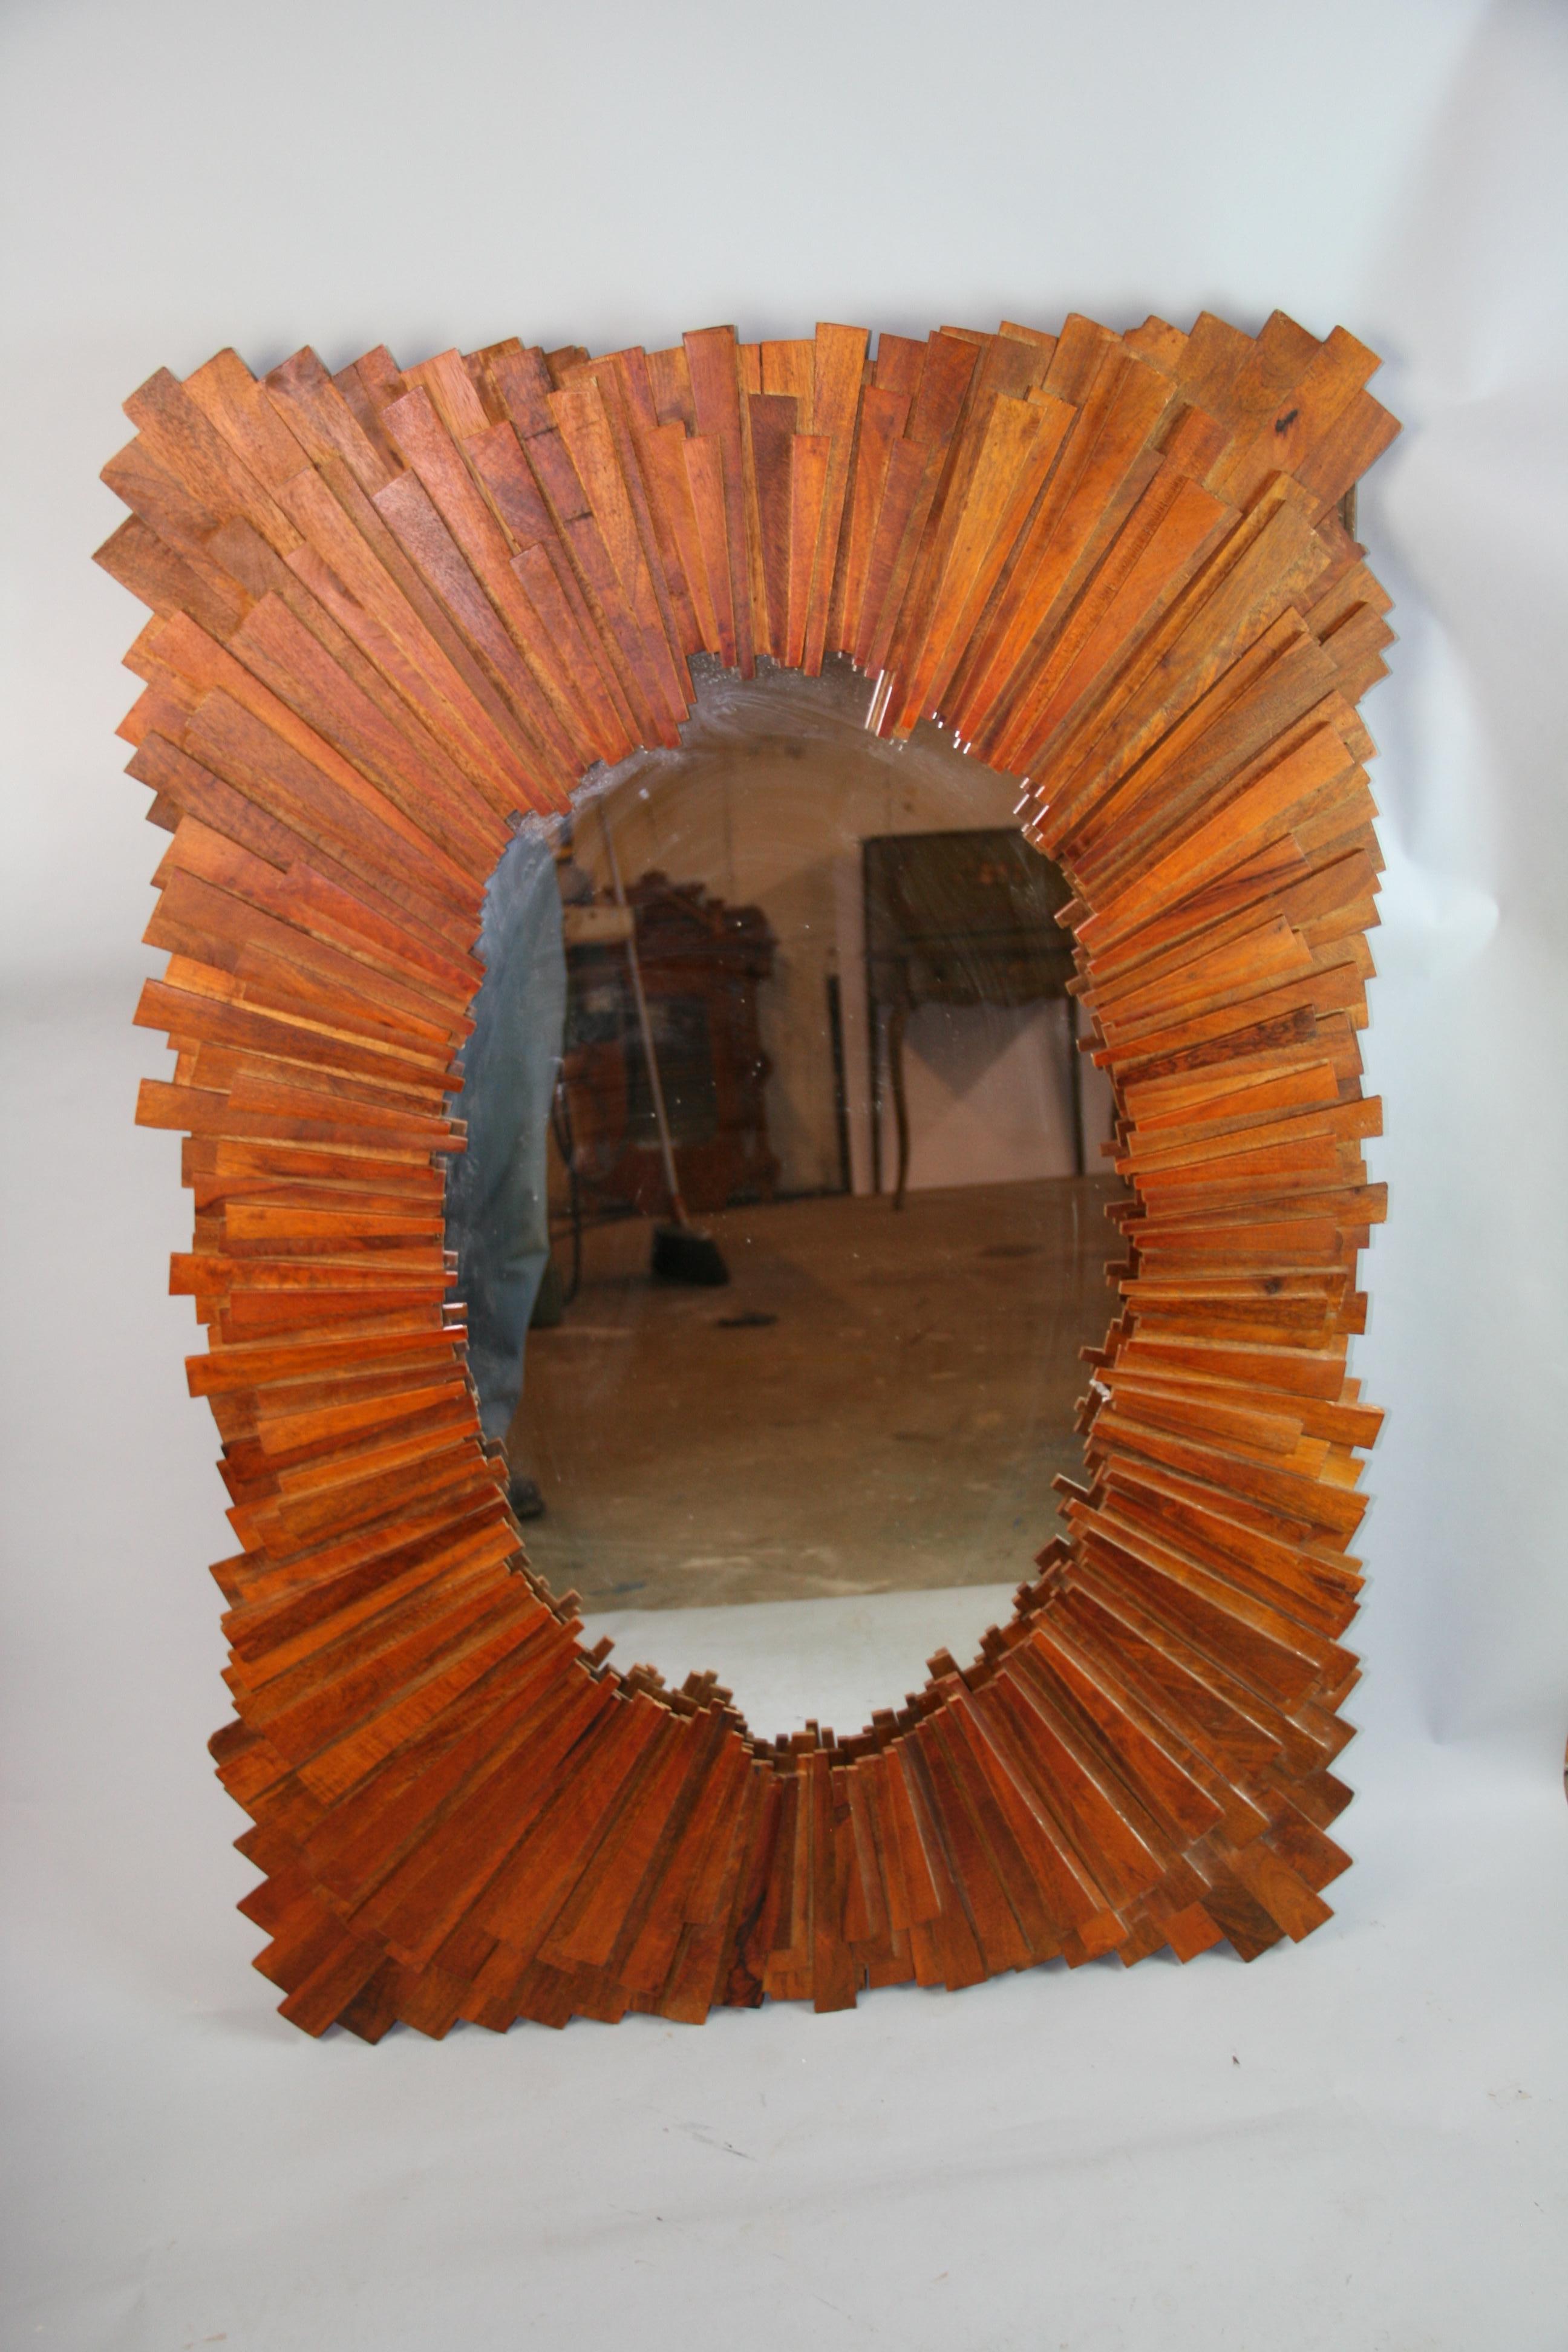 1288 Large wood starburst mirror made from individual pieces of hardwood/
Can be hung vertical or horizontal with attached hardware.